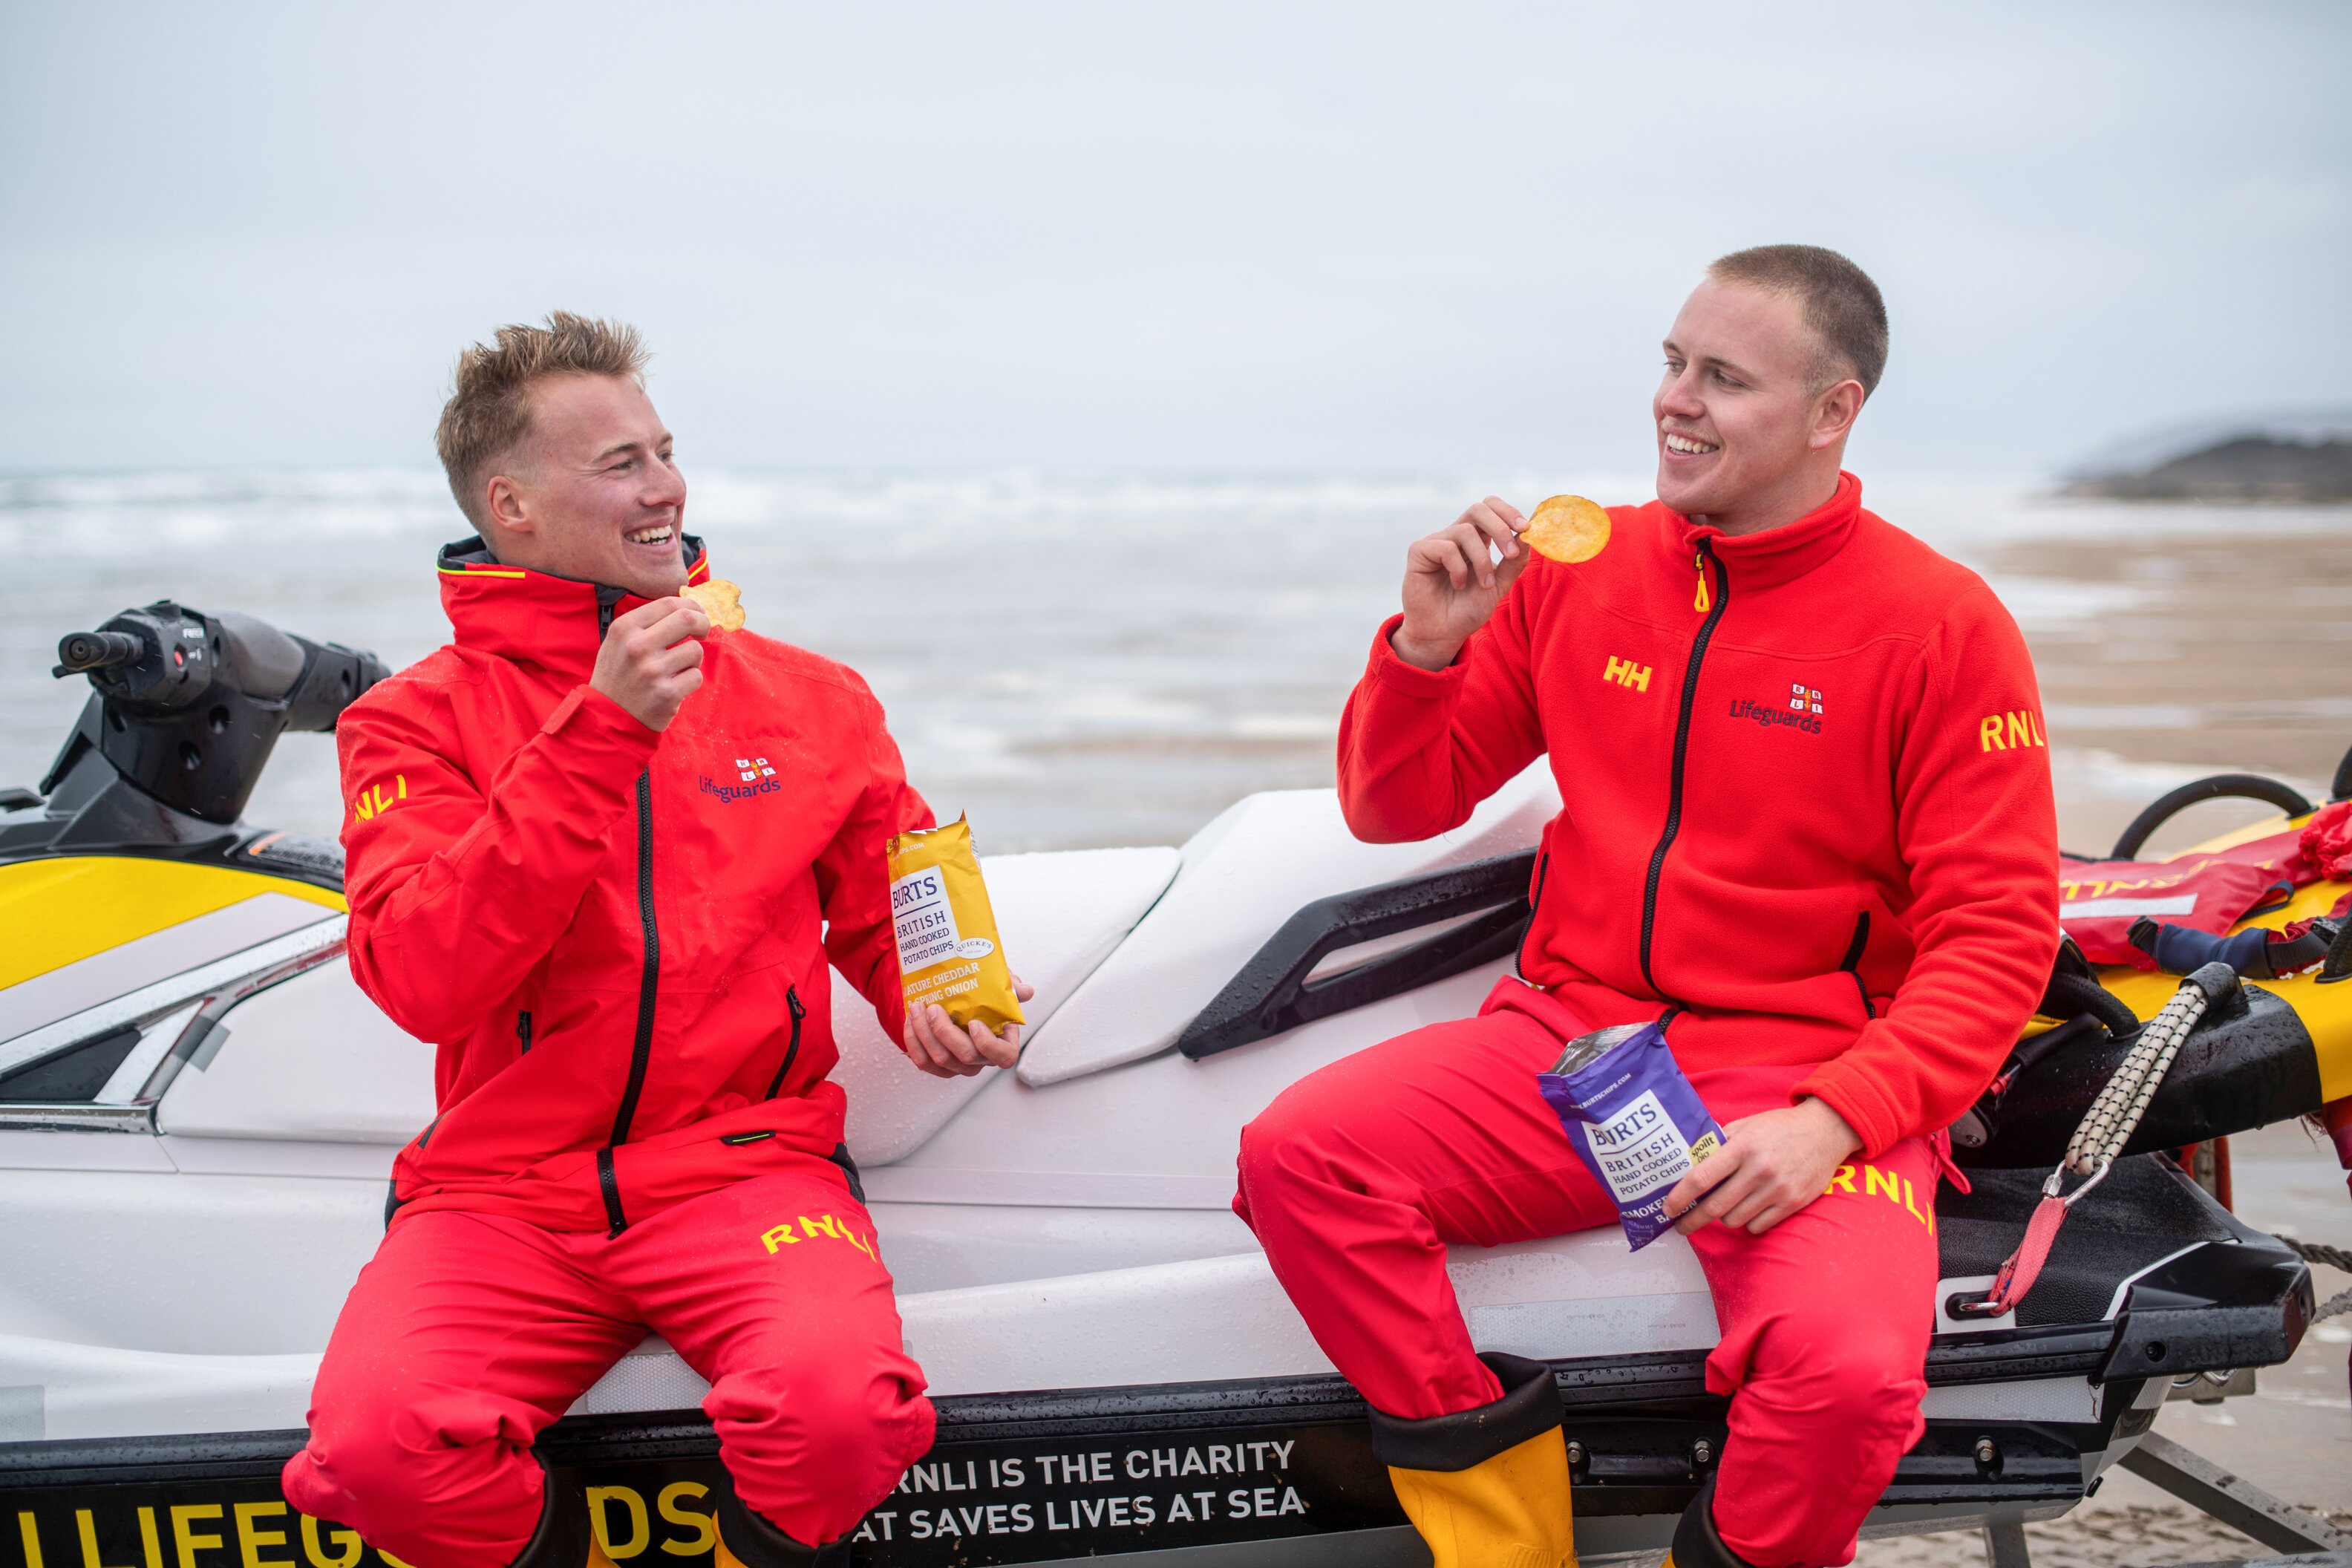 Burts Snacks announces partnership with the Royal National Lifeboat Institution